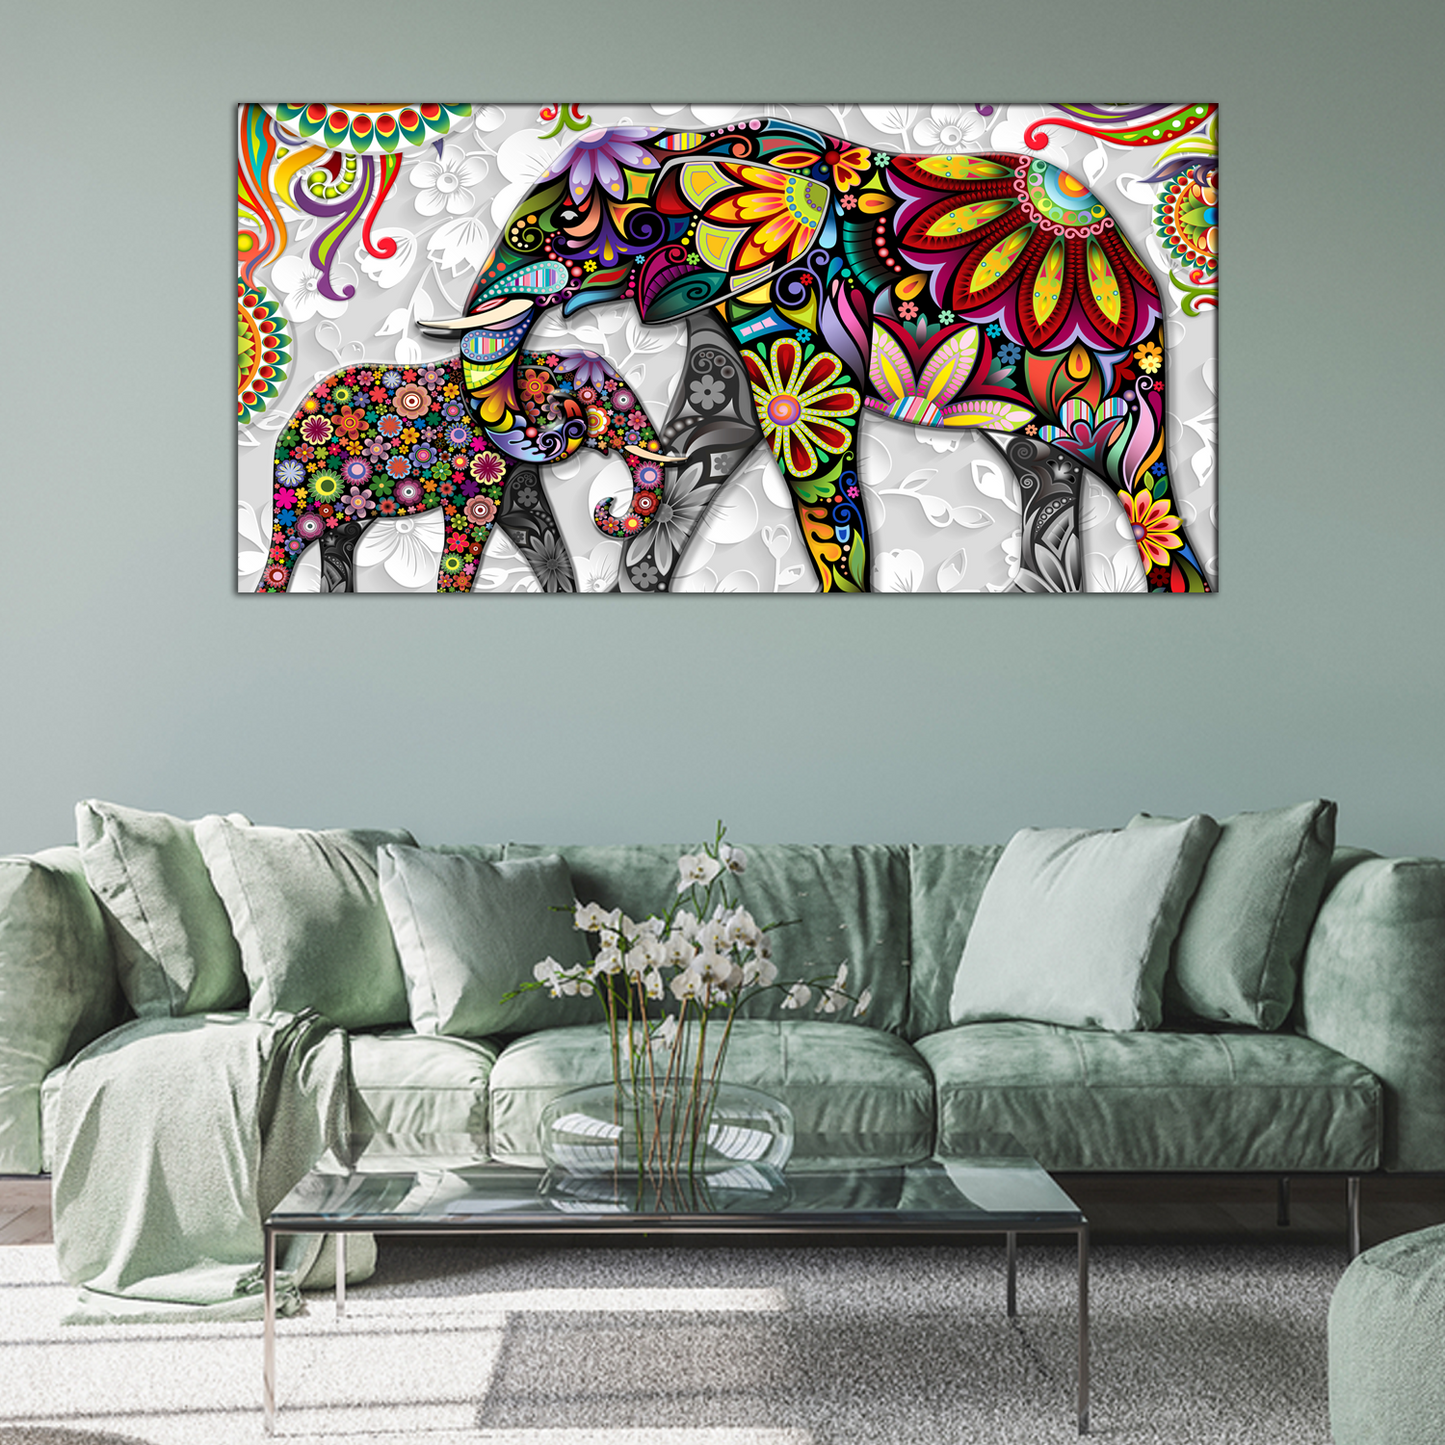 Colorful Elephants Canvas Print Wall Painting